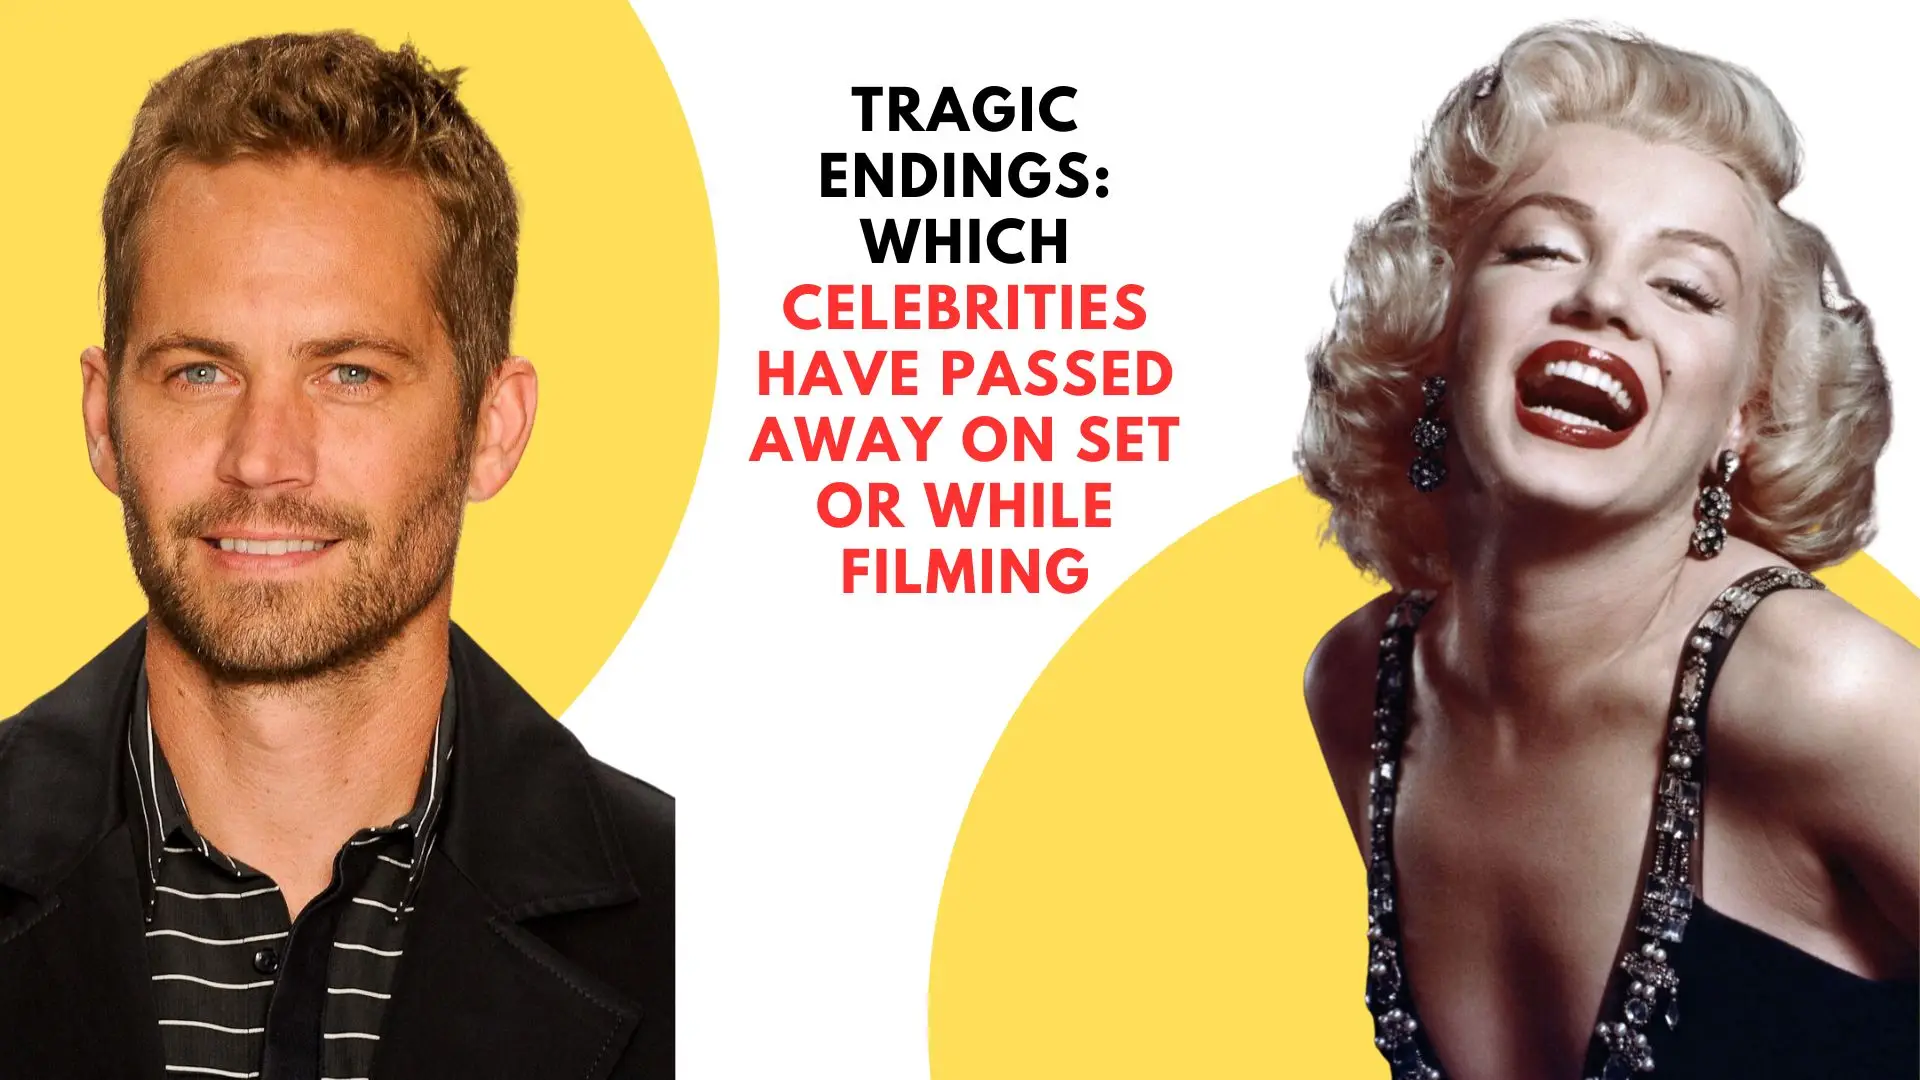 Tragic Endings: Which Celebrities Have Passed Away on Set or While Filming